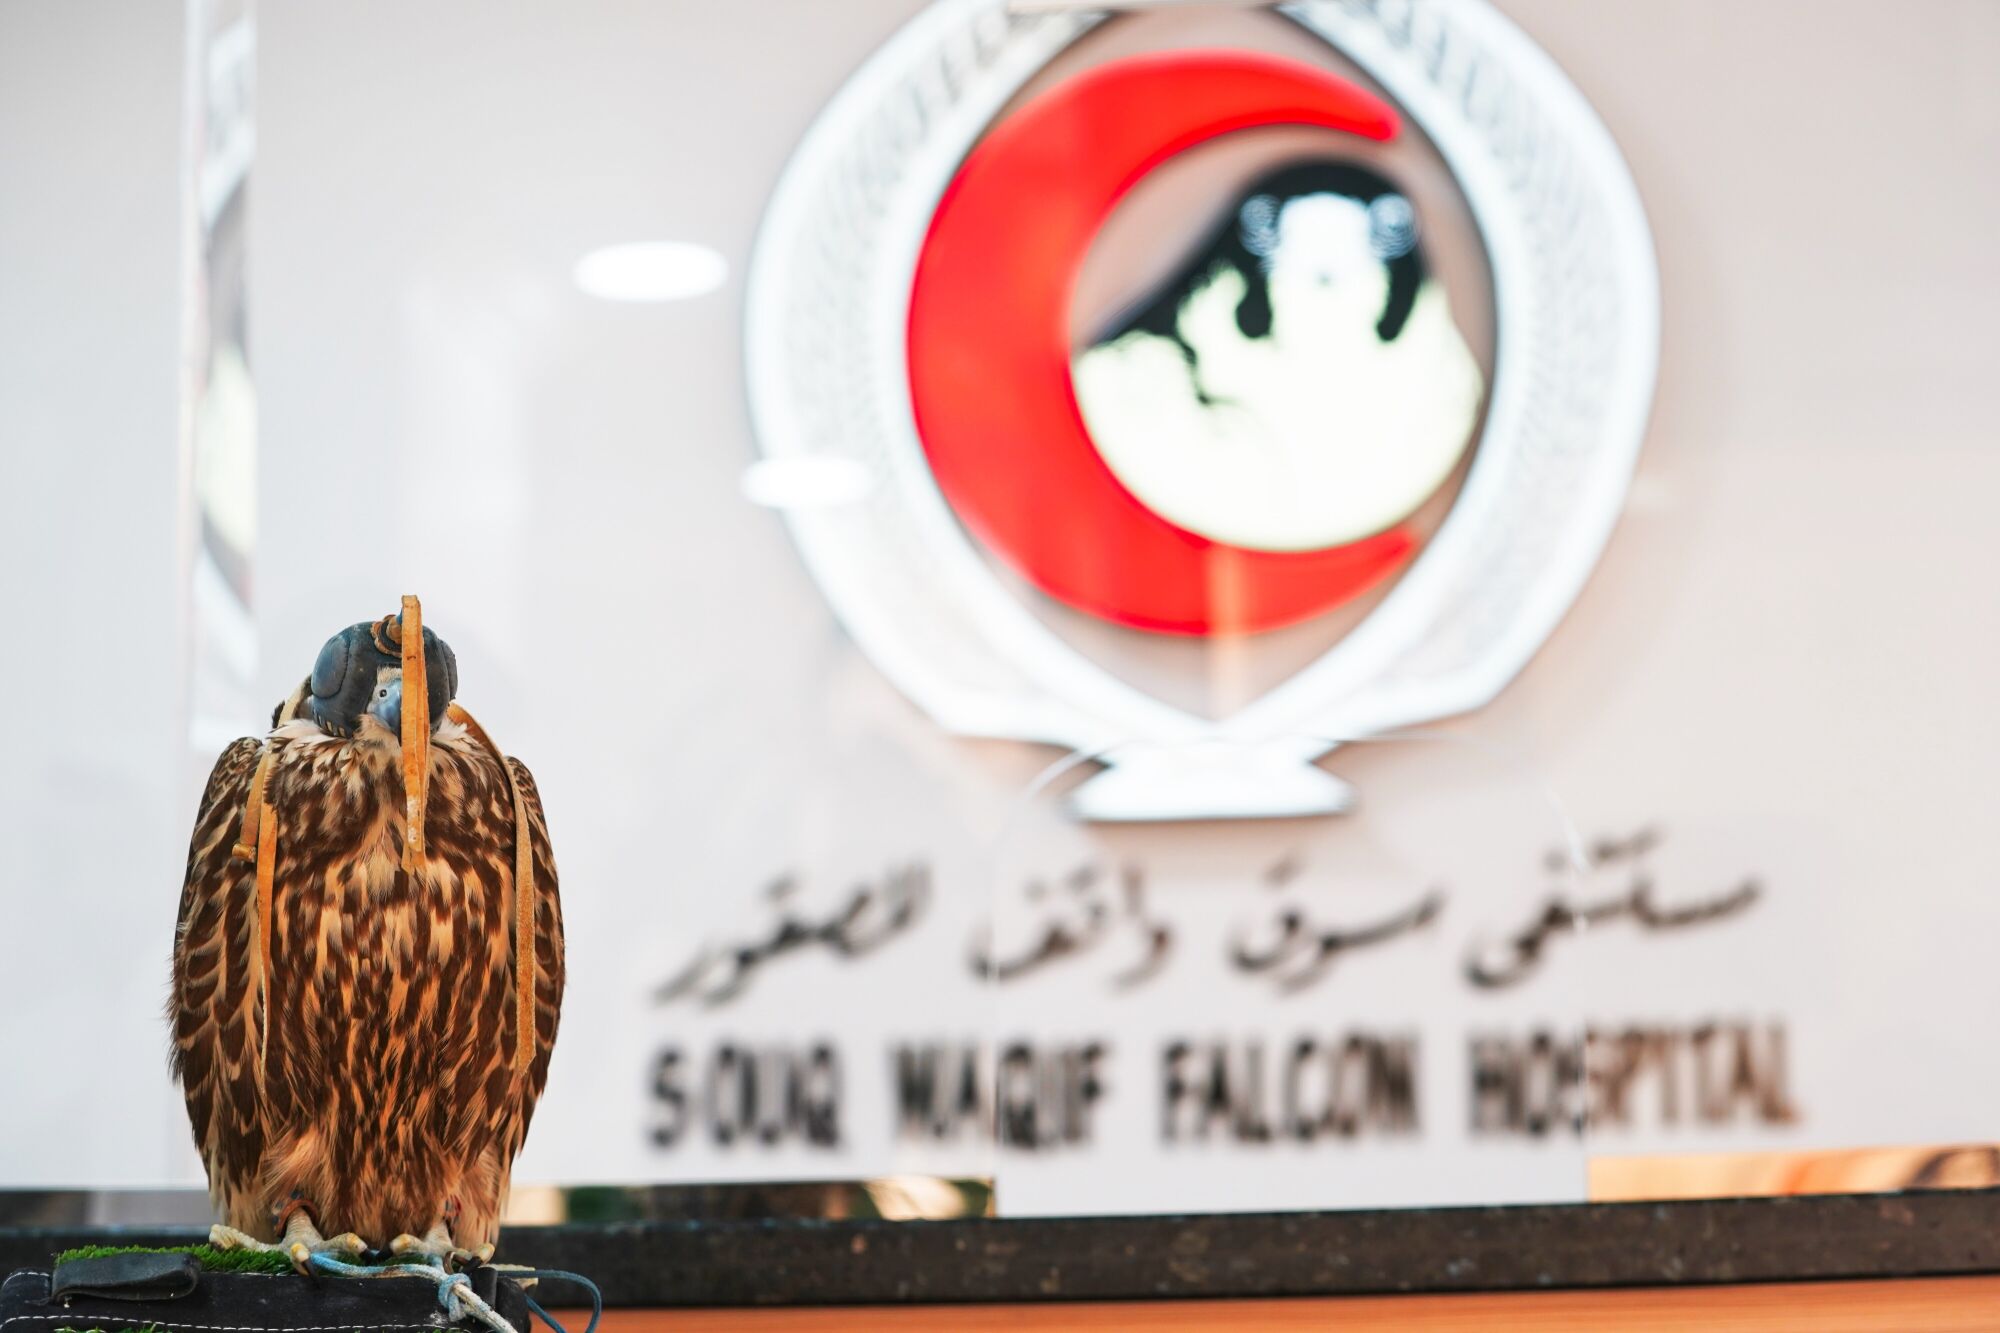 A peregrine falcon waits for a procedure at the Souq Waqif Falcon Hospital.